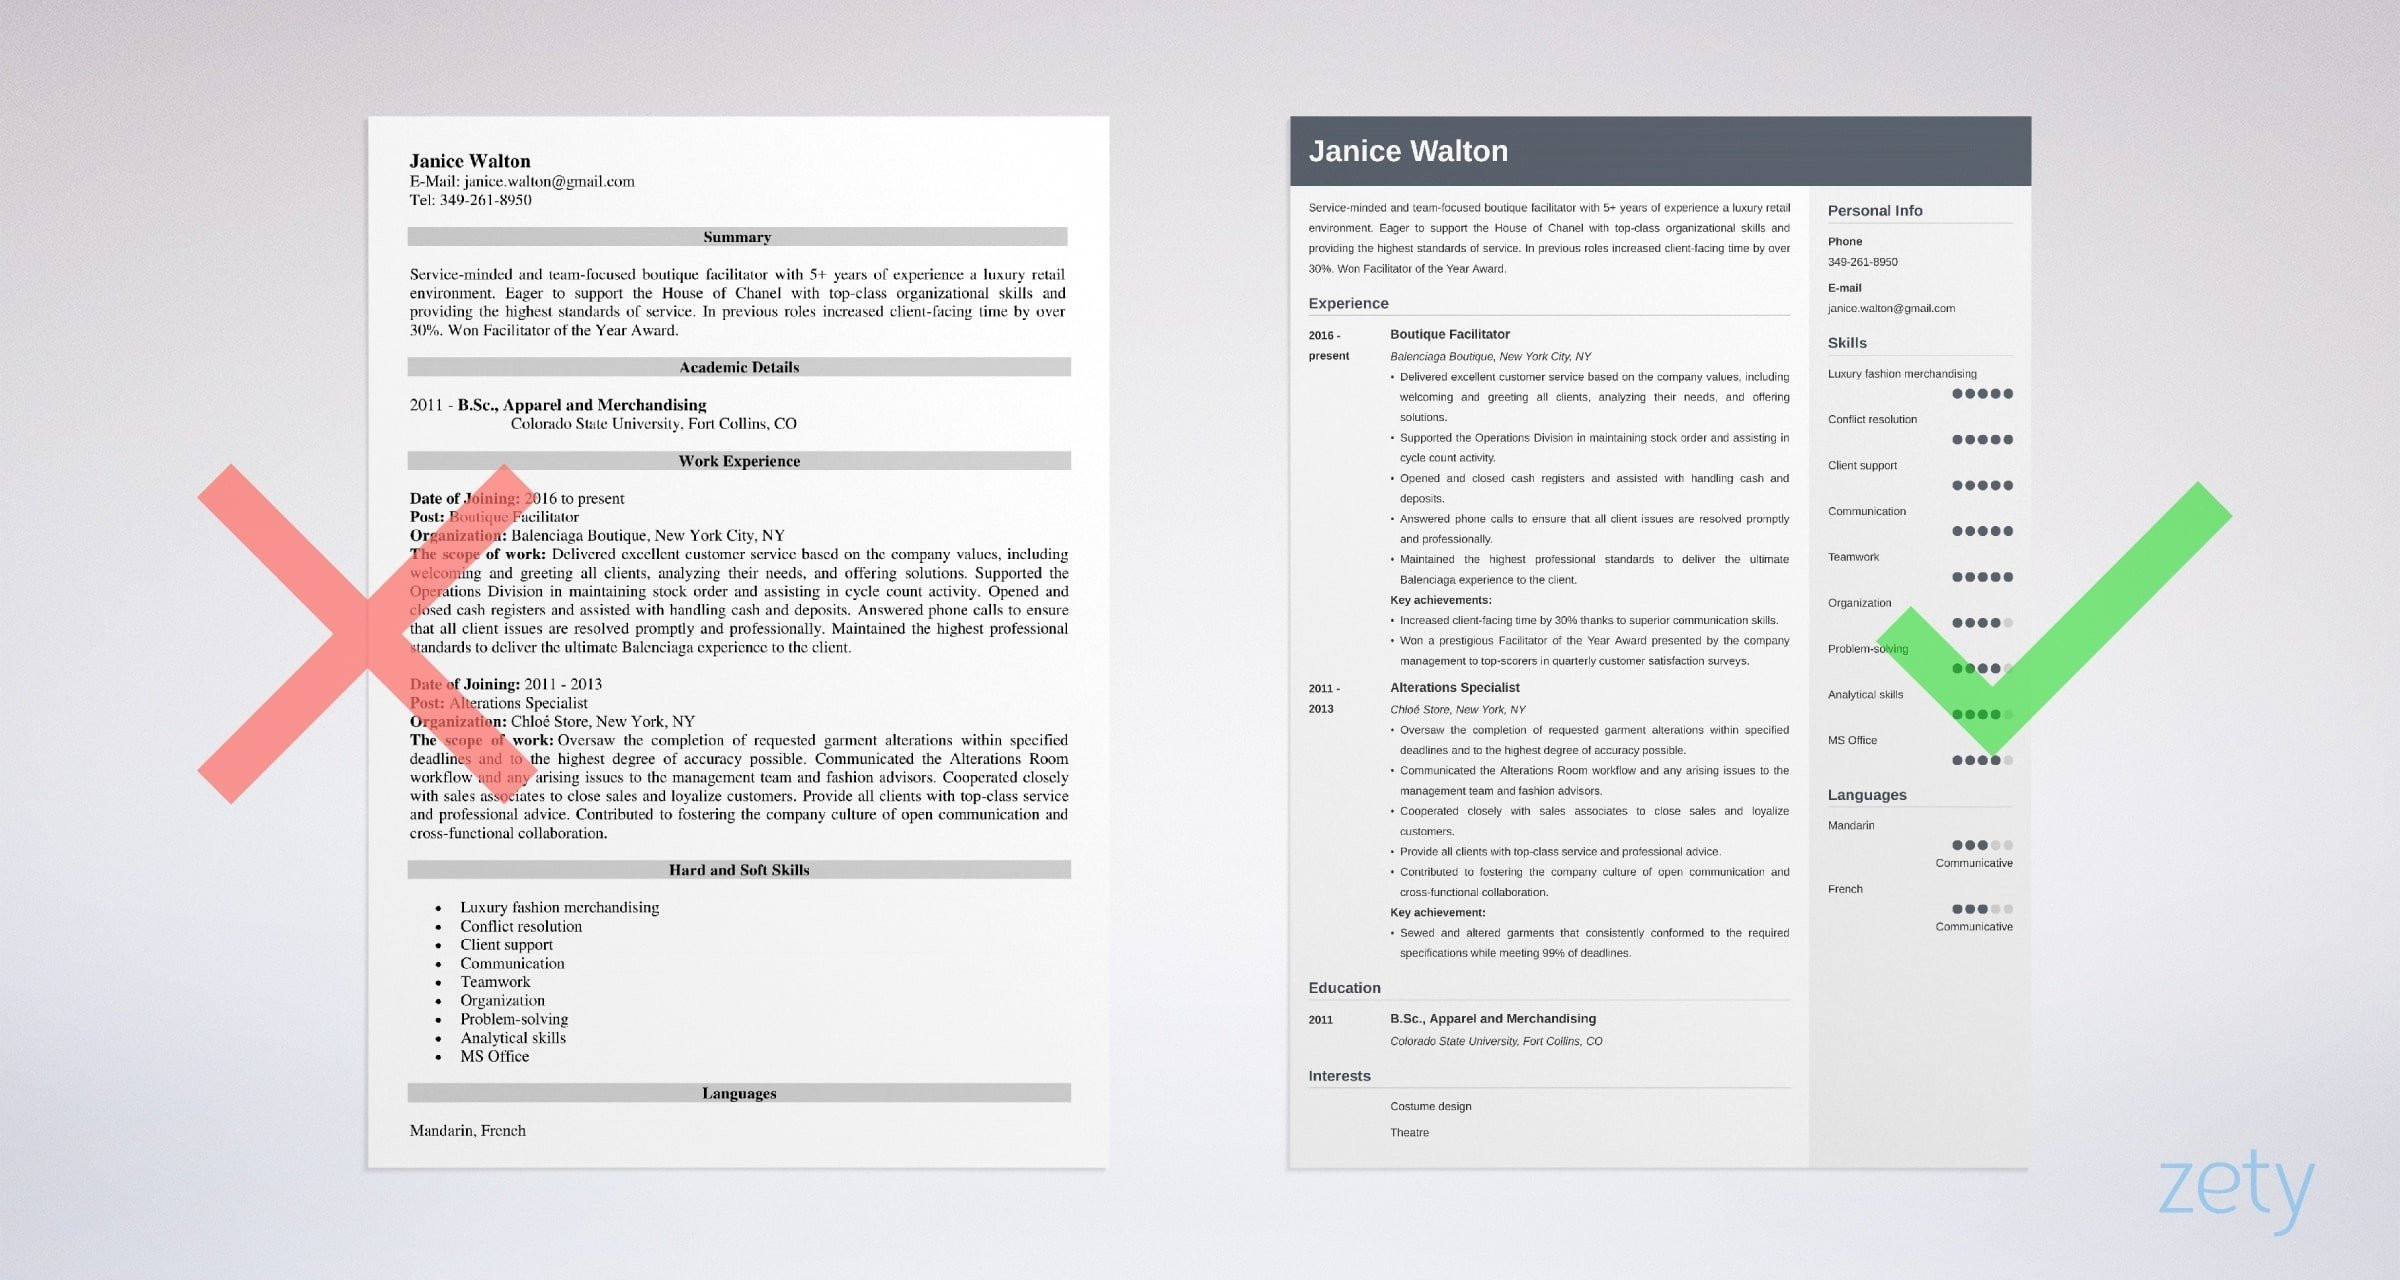 Latest Trend In Resume Writing Samples Fashion Resume Examples (templates & Guide with 20lancarrezekiq Tips)